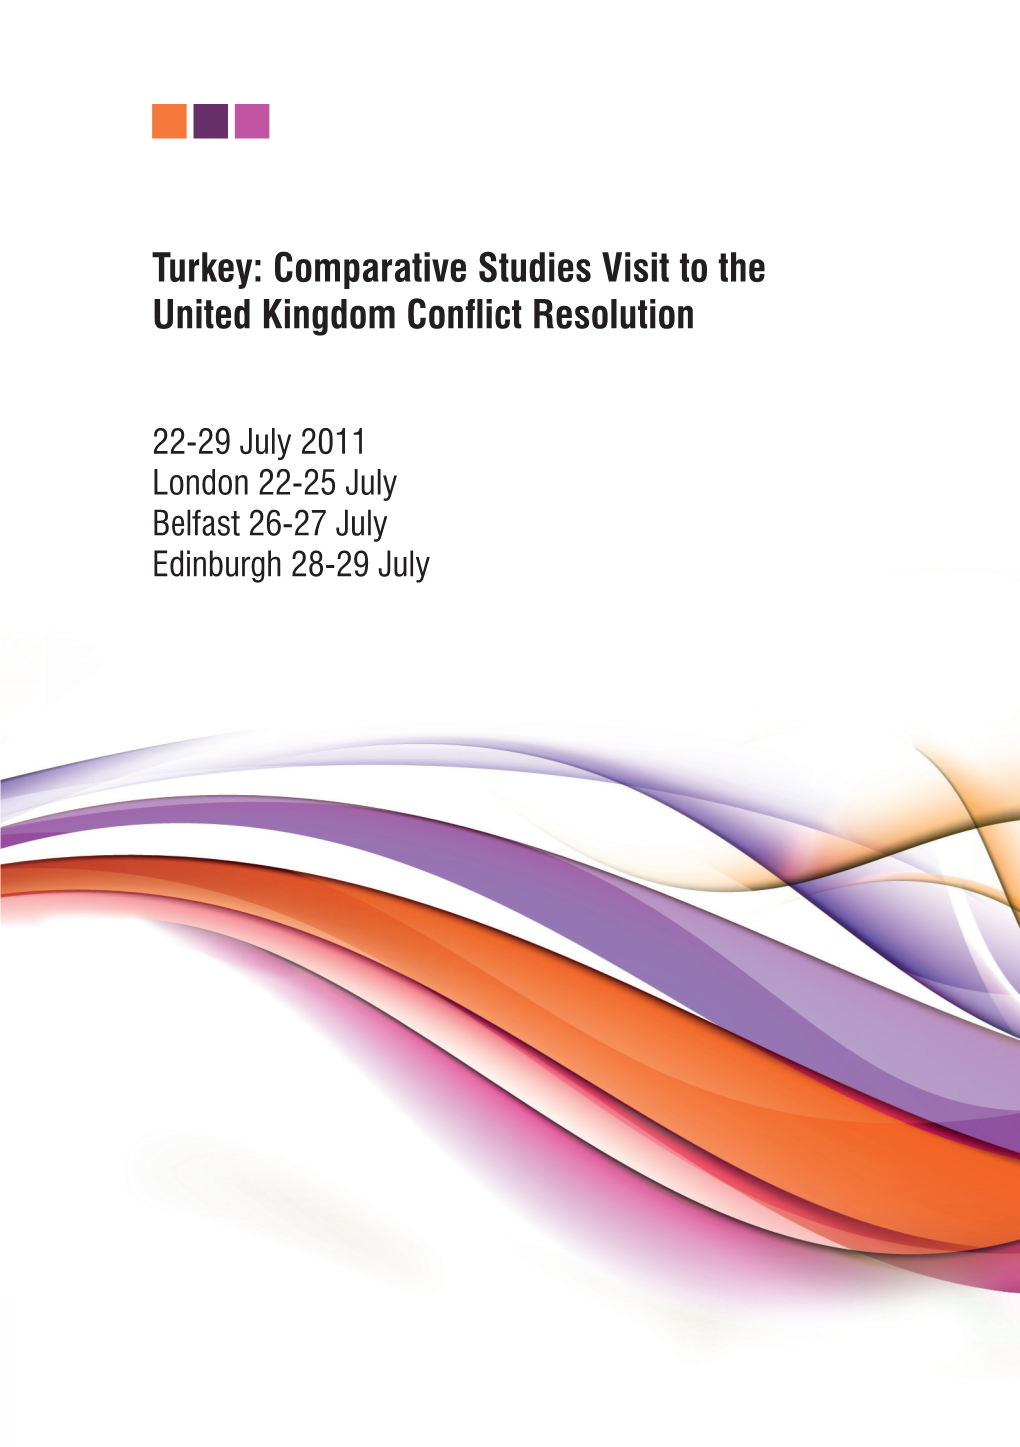 Turkey: Comparative Studies Visit to the United Kingdom Conflict Resolution